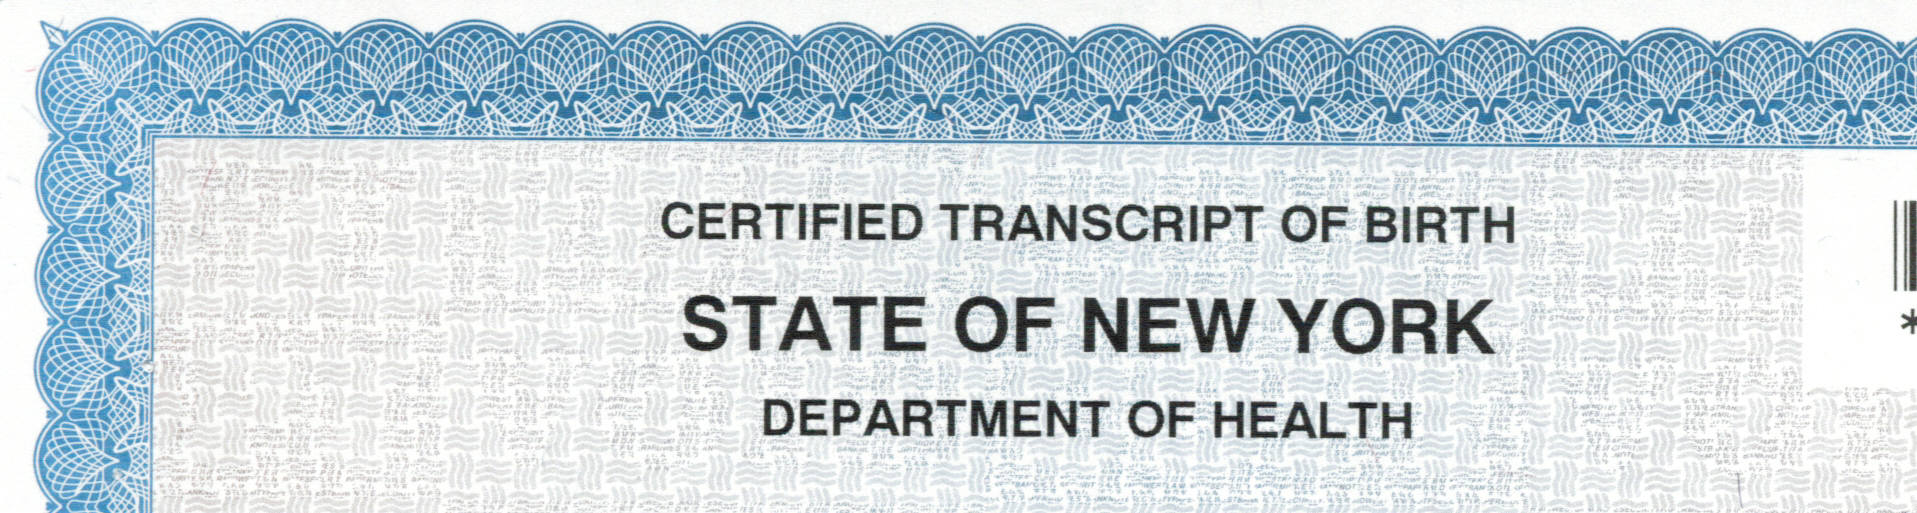 ny_state_birth_certificate